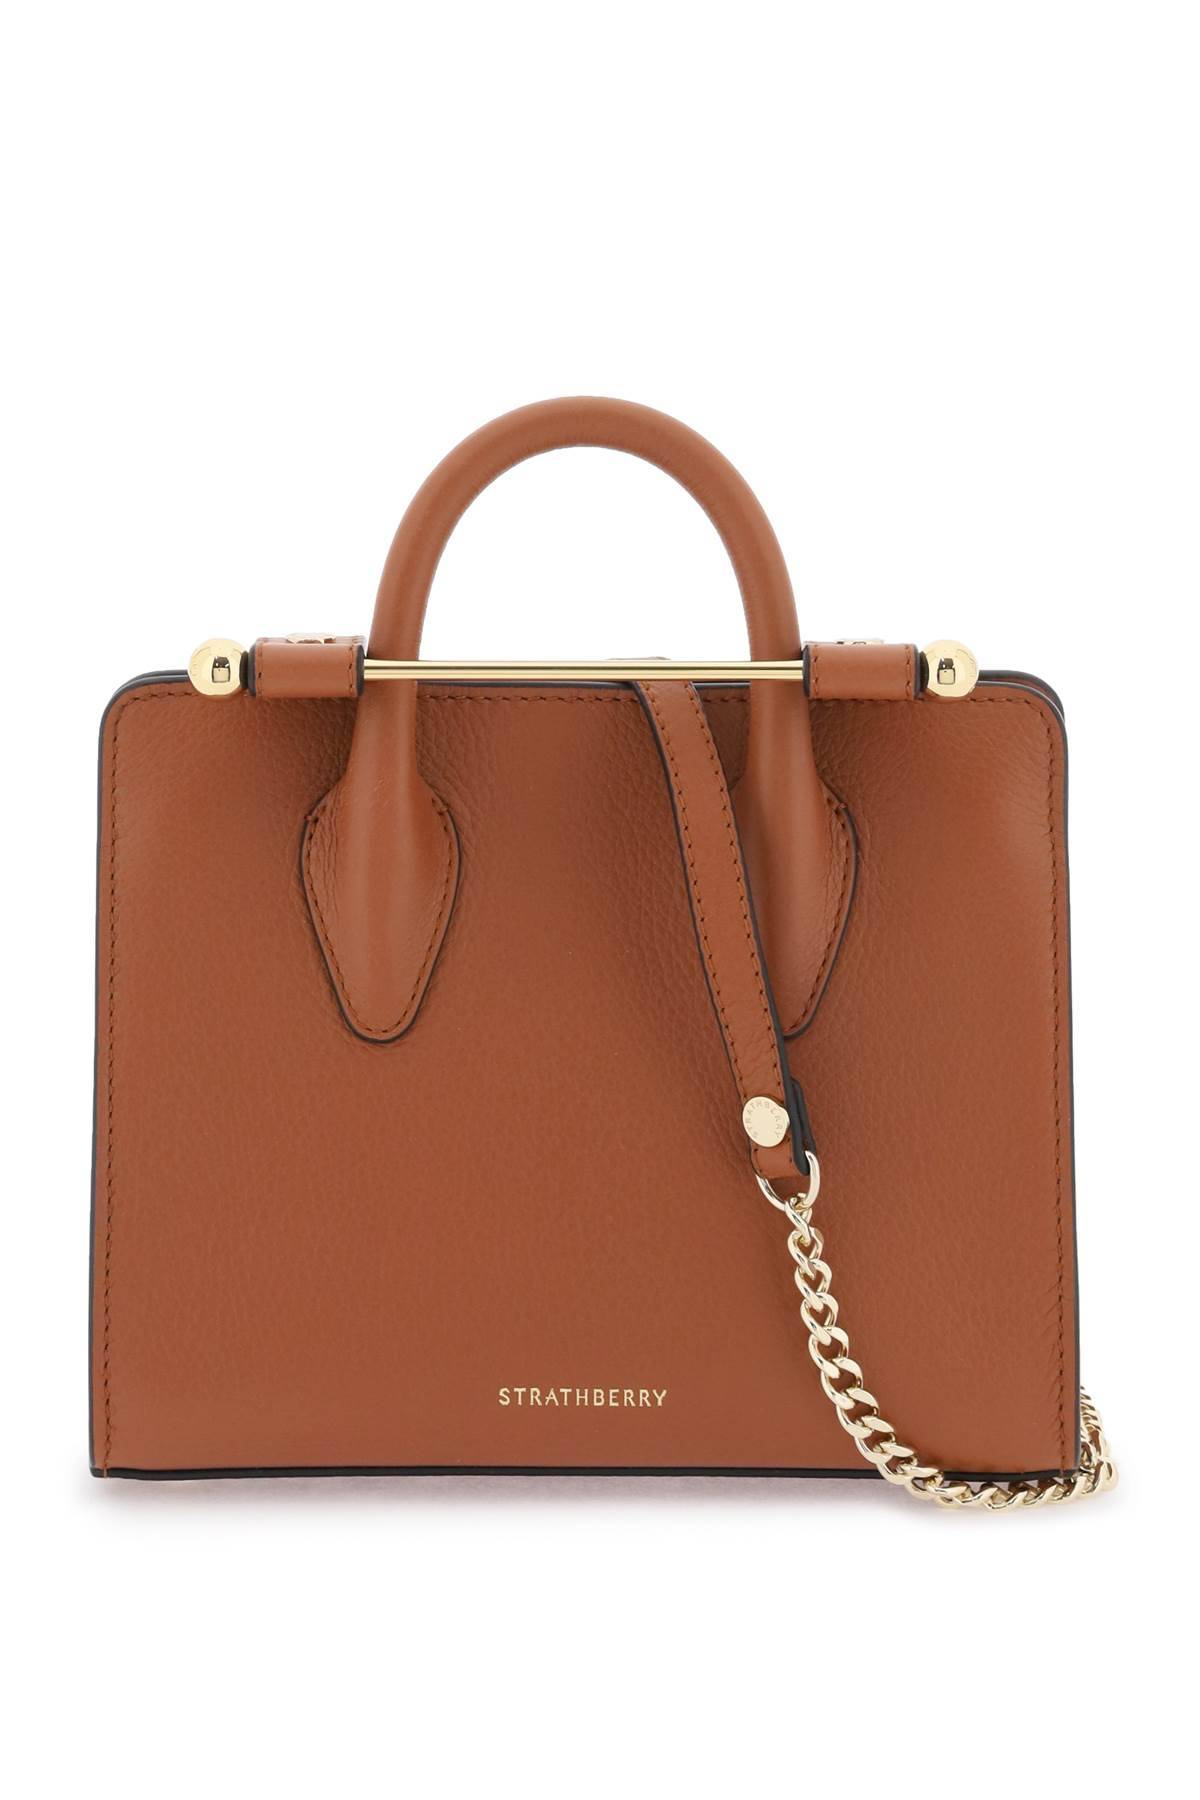 Strathberry STRATHBERRY nano tote leather bag